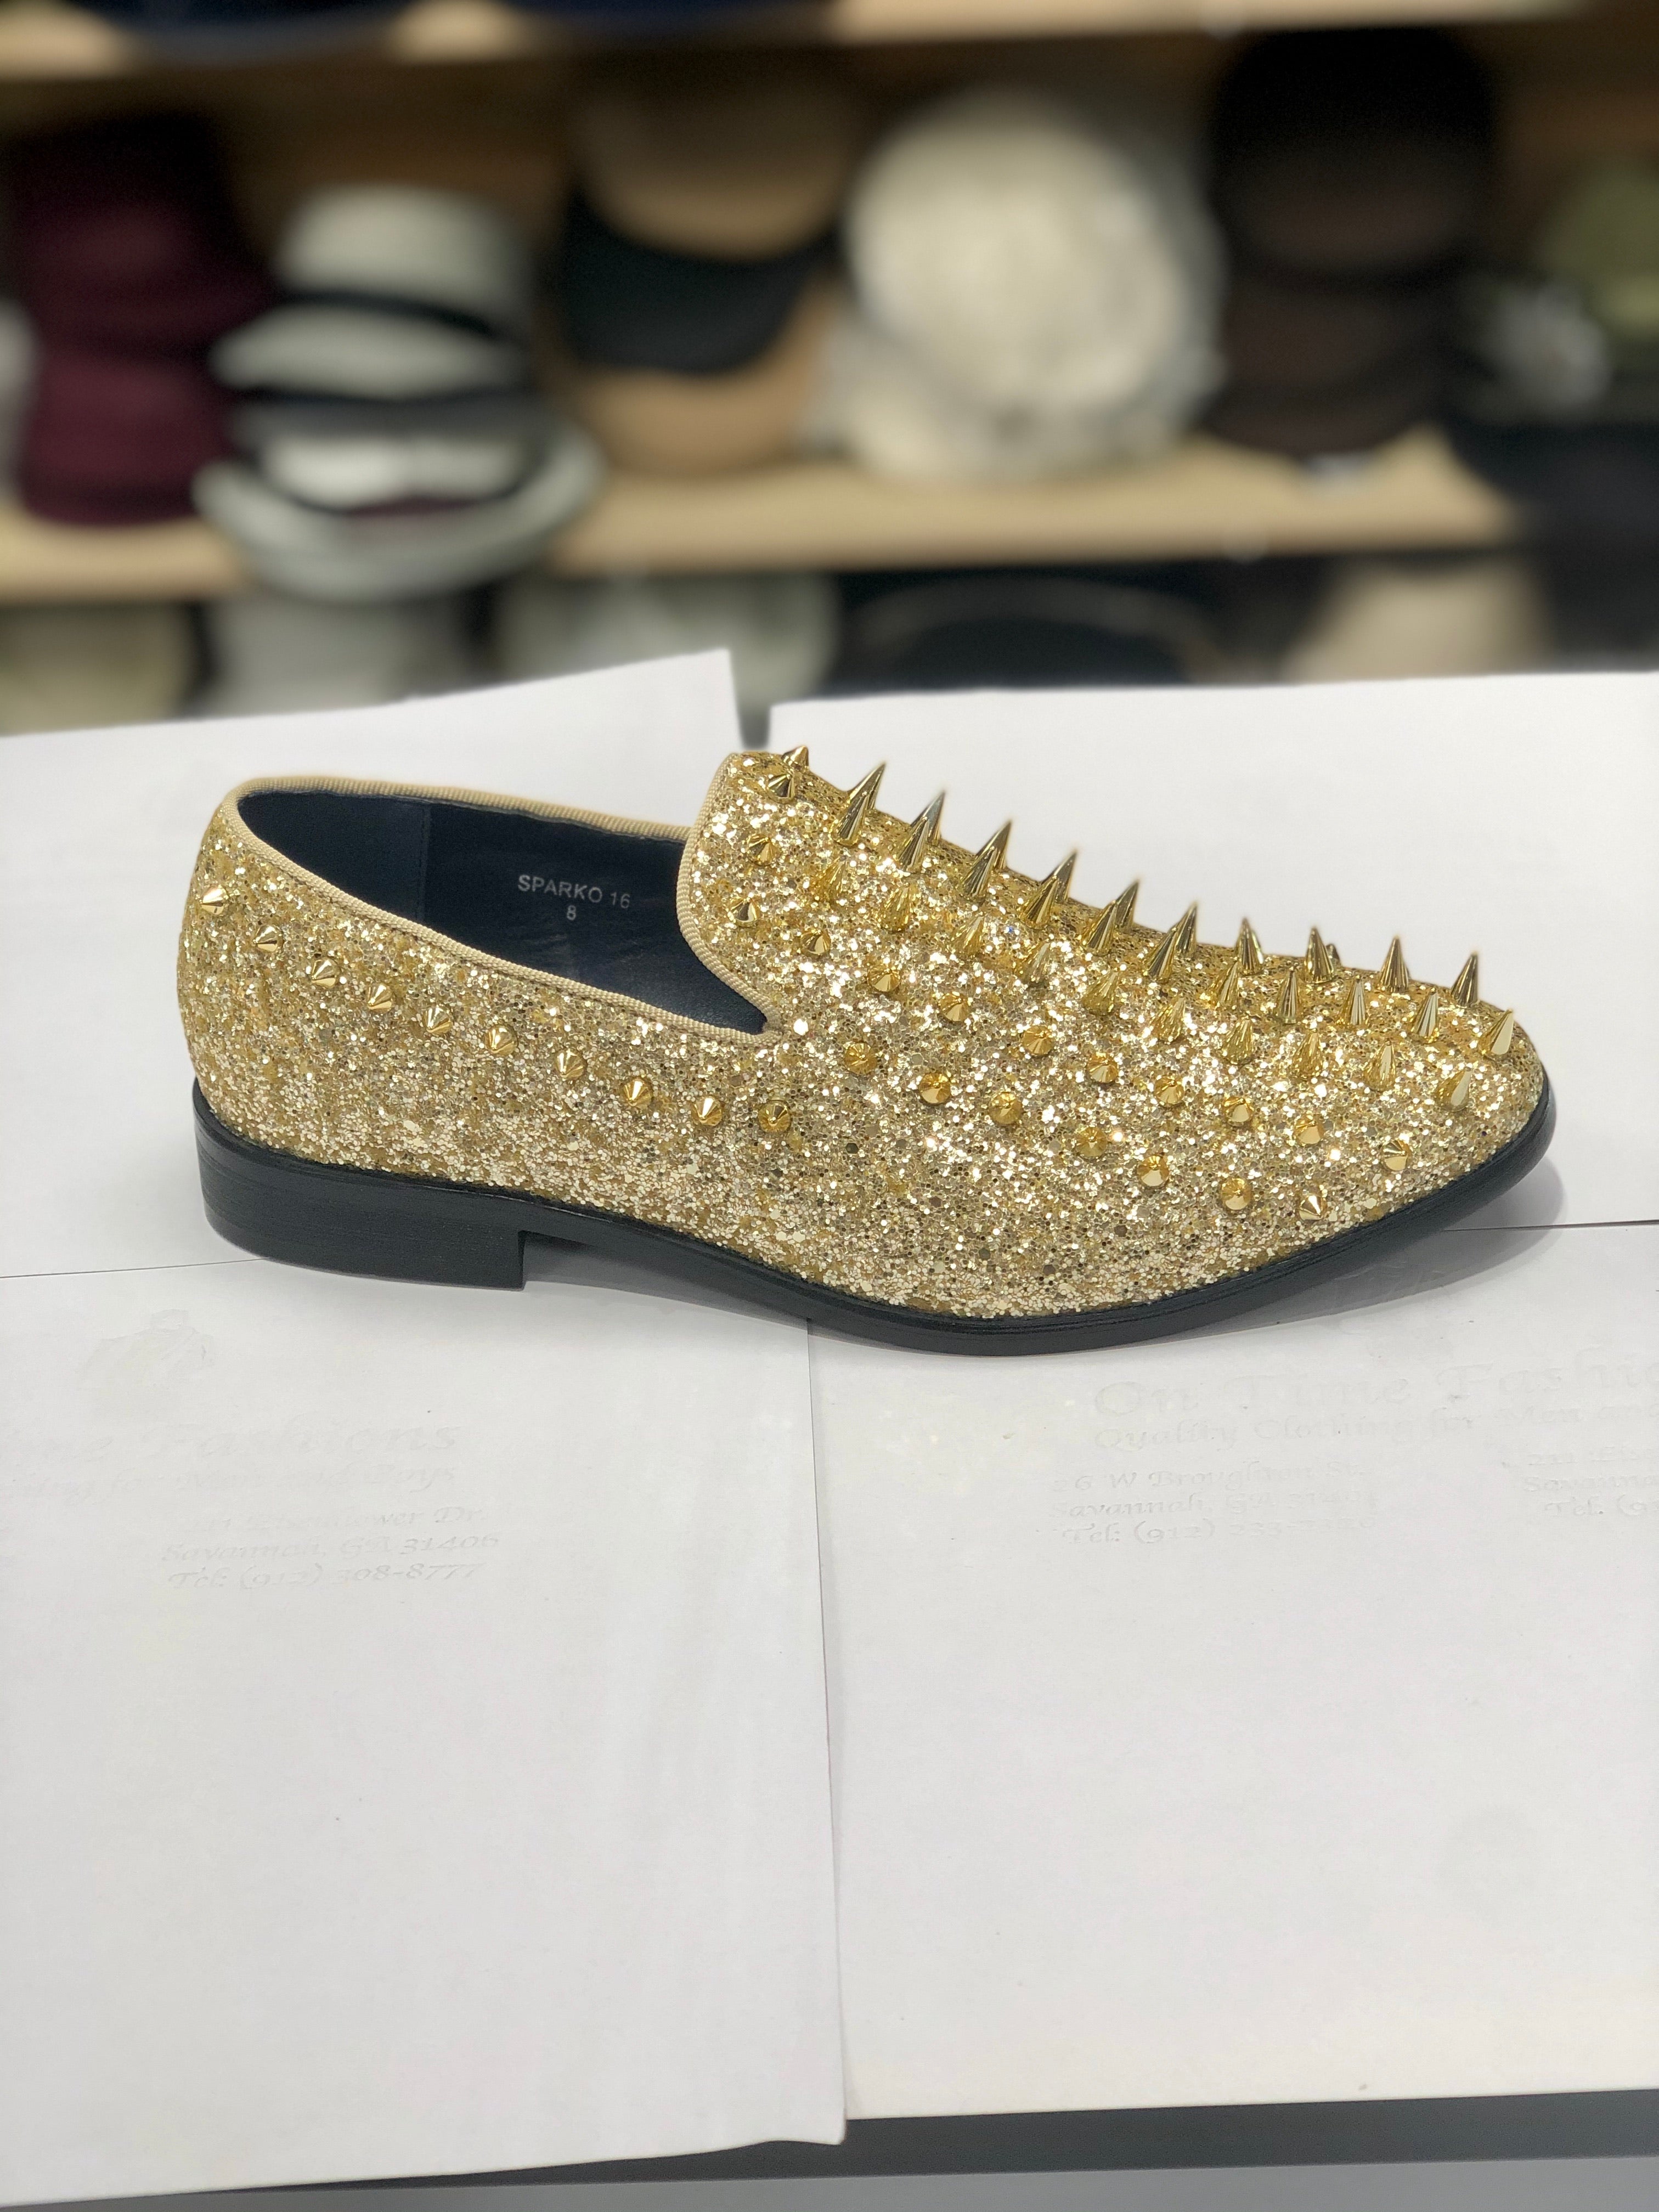 Sparko 16 Gold Spike Loafers – On Time 